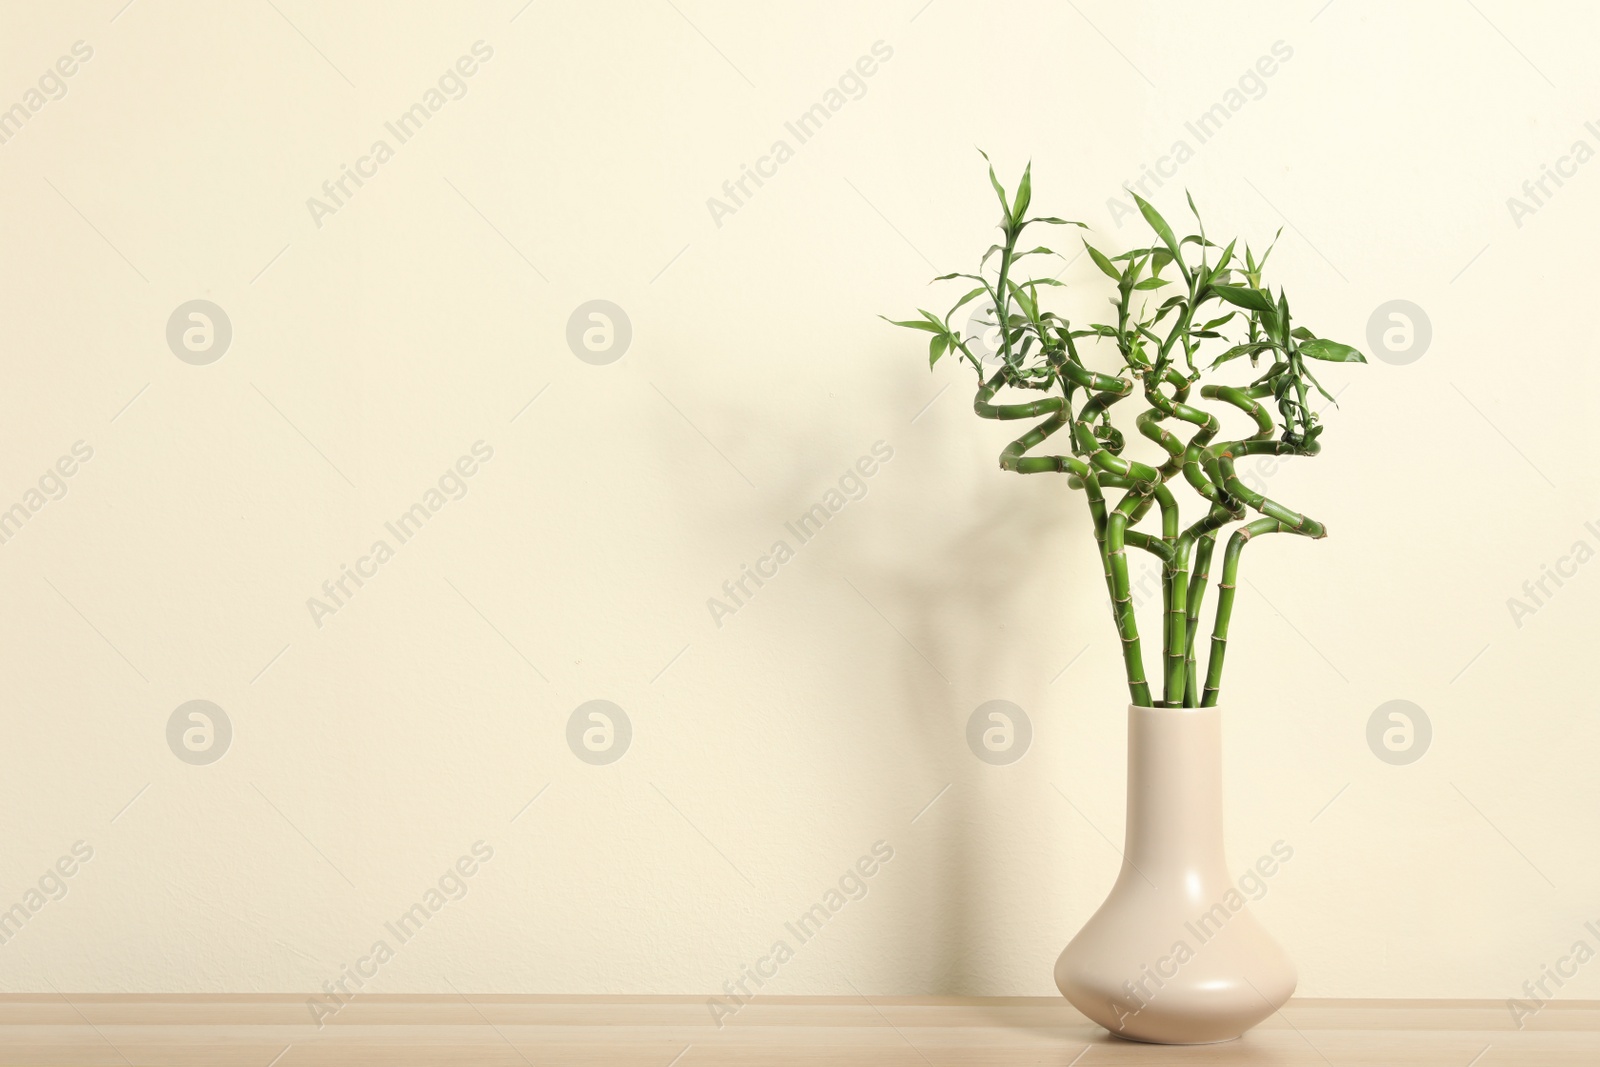 Photo of Vase with bamboo stems on wooden table against beige wall, space for text